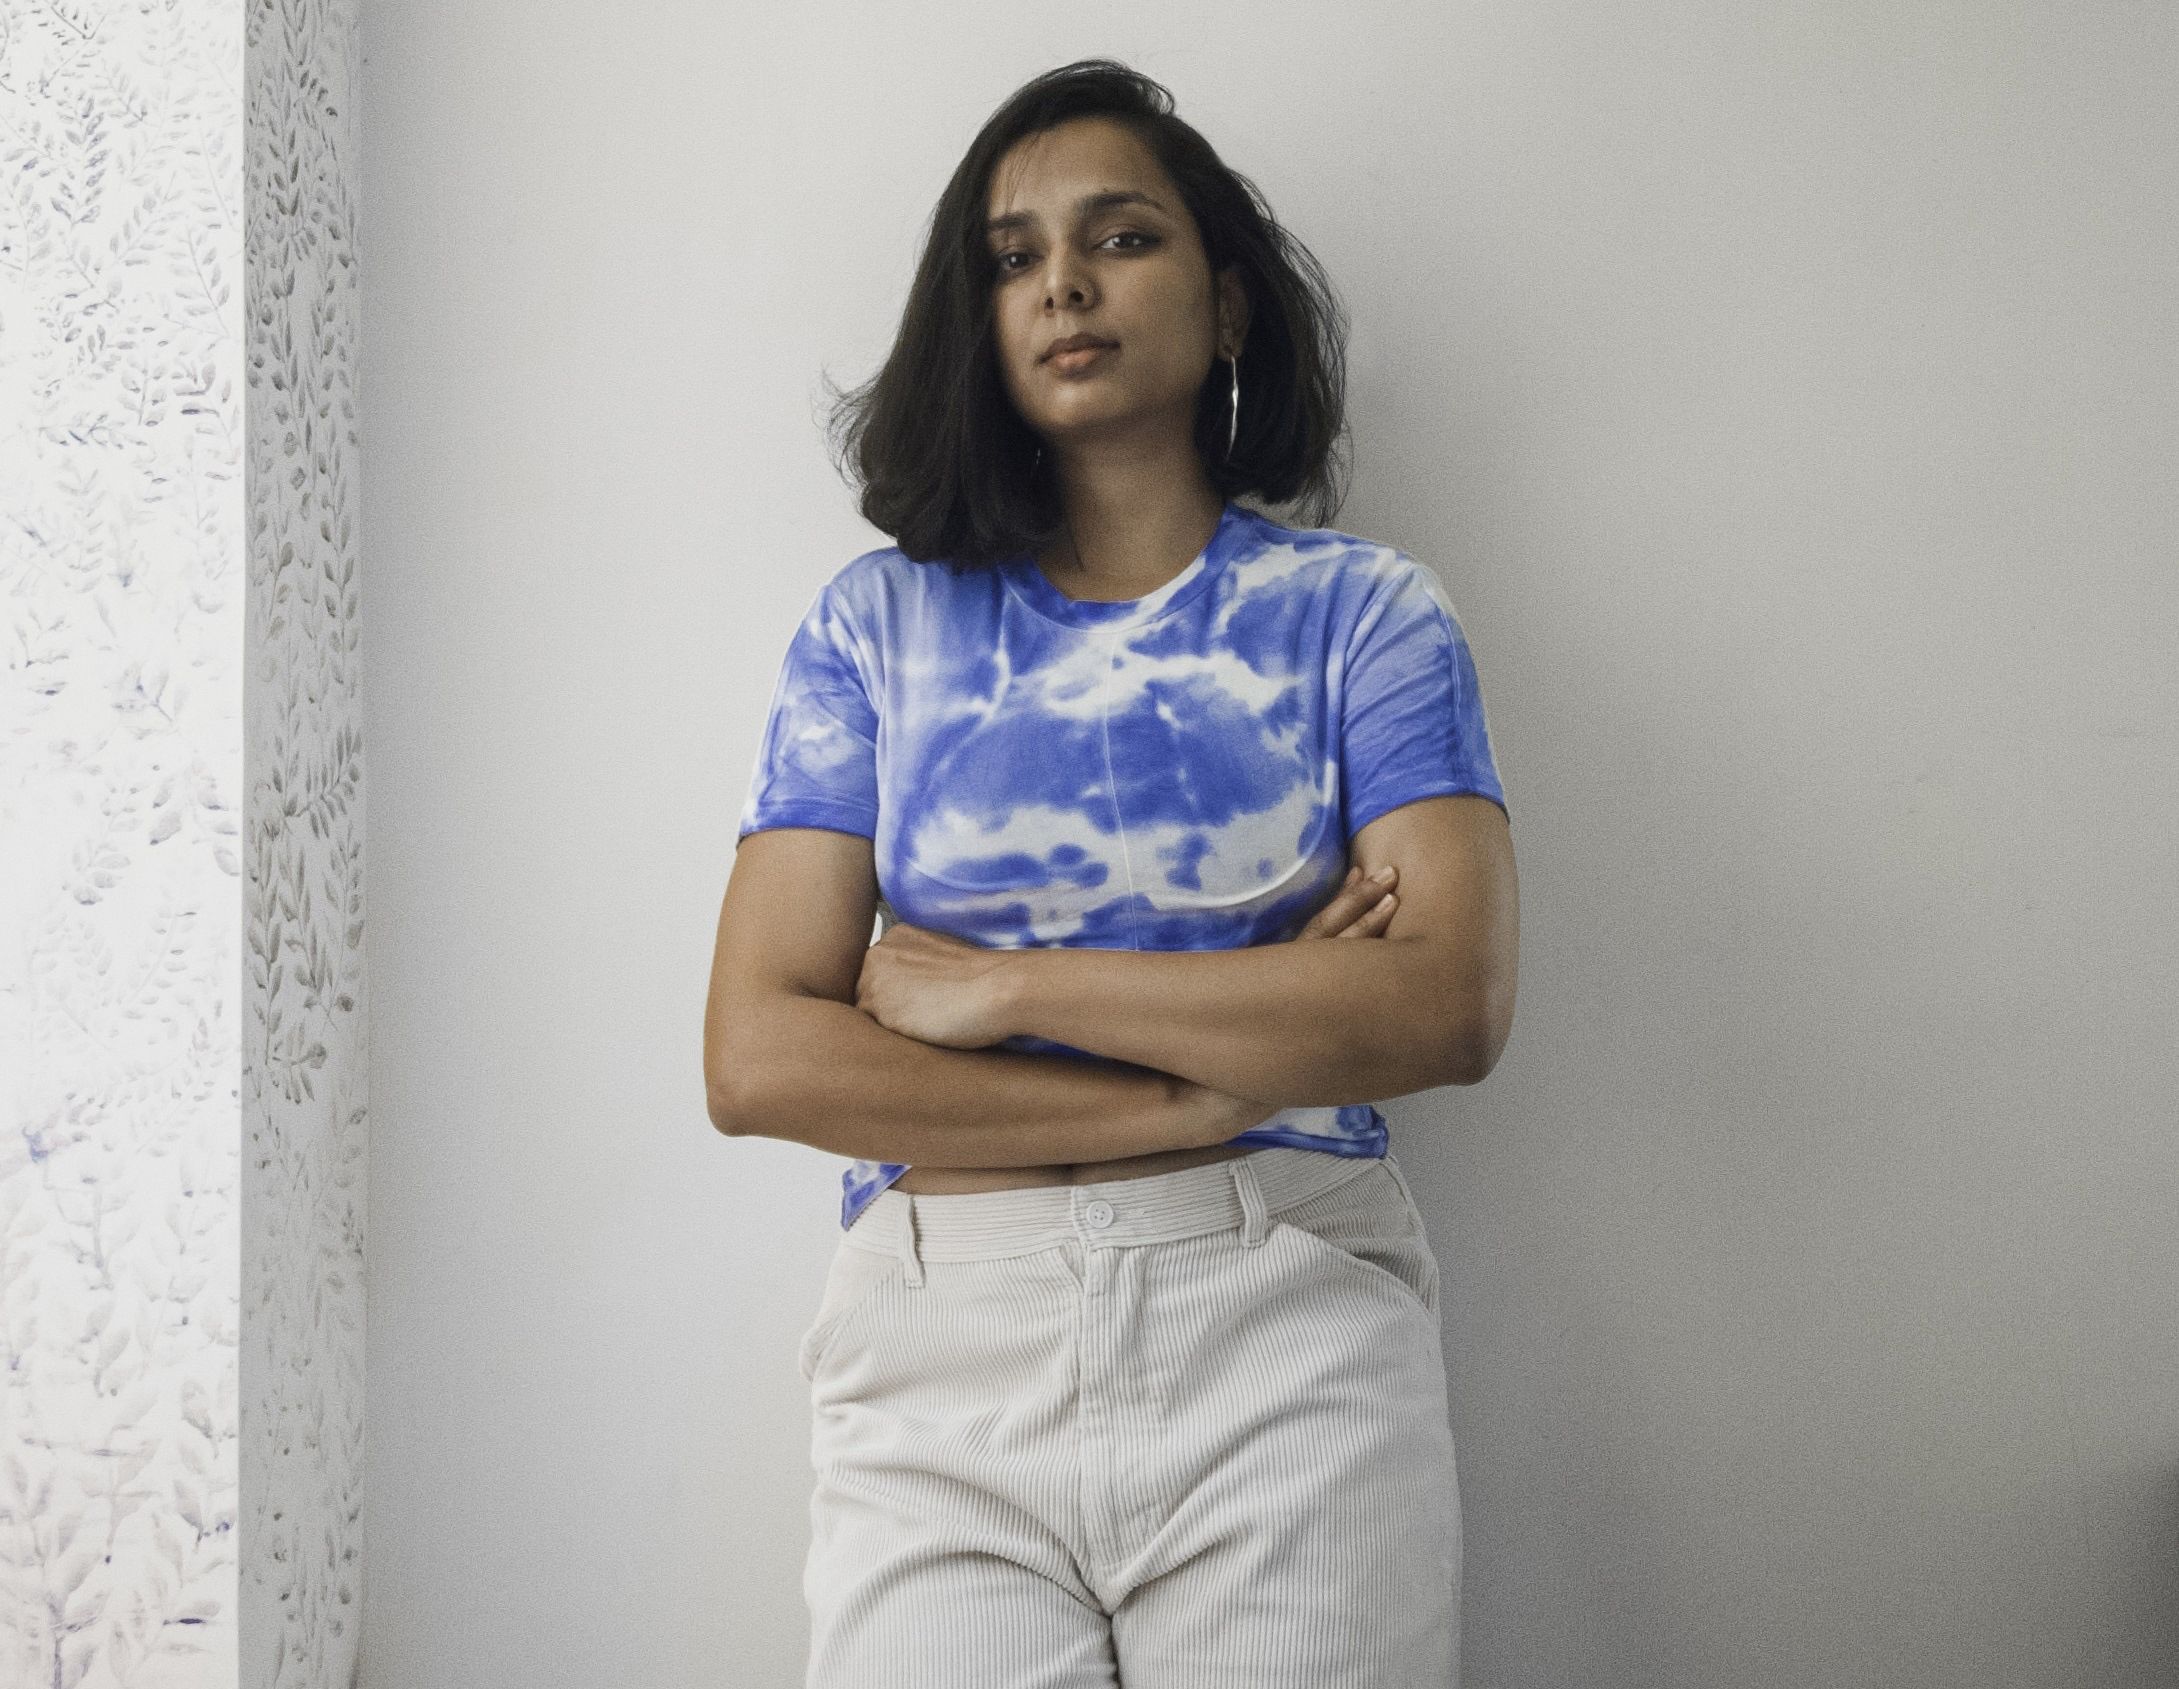 Portrait of a Indian woman in a blue top and white pants